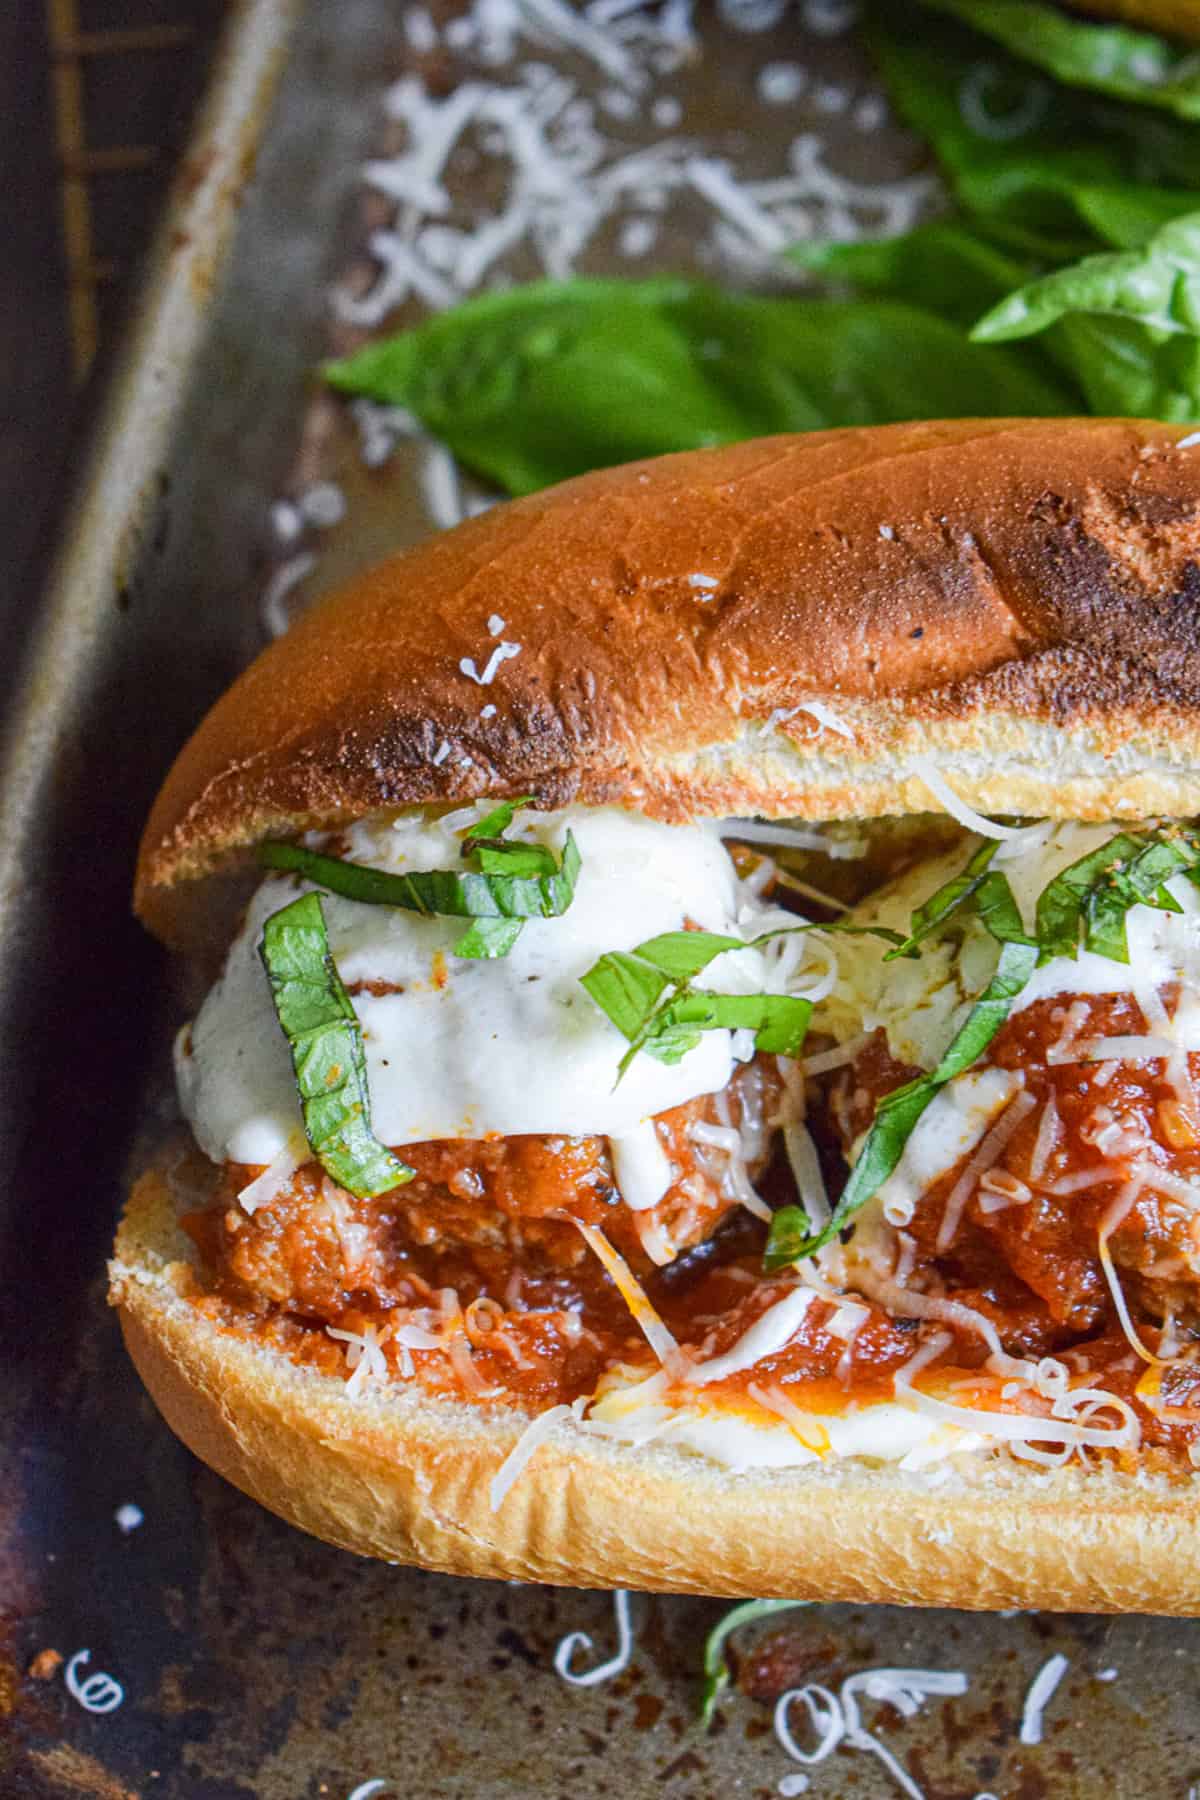 Meatballs in red sauce on a toasted sub roll.